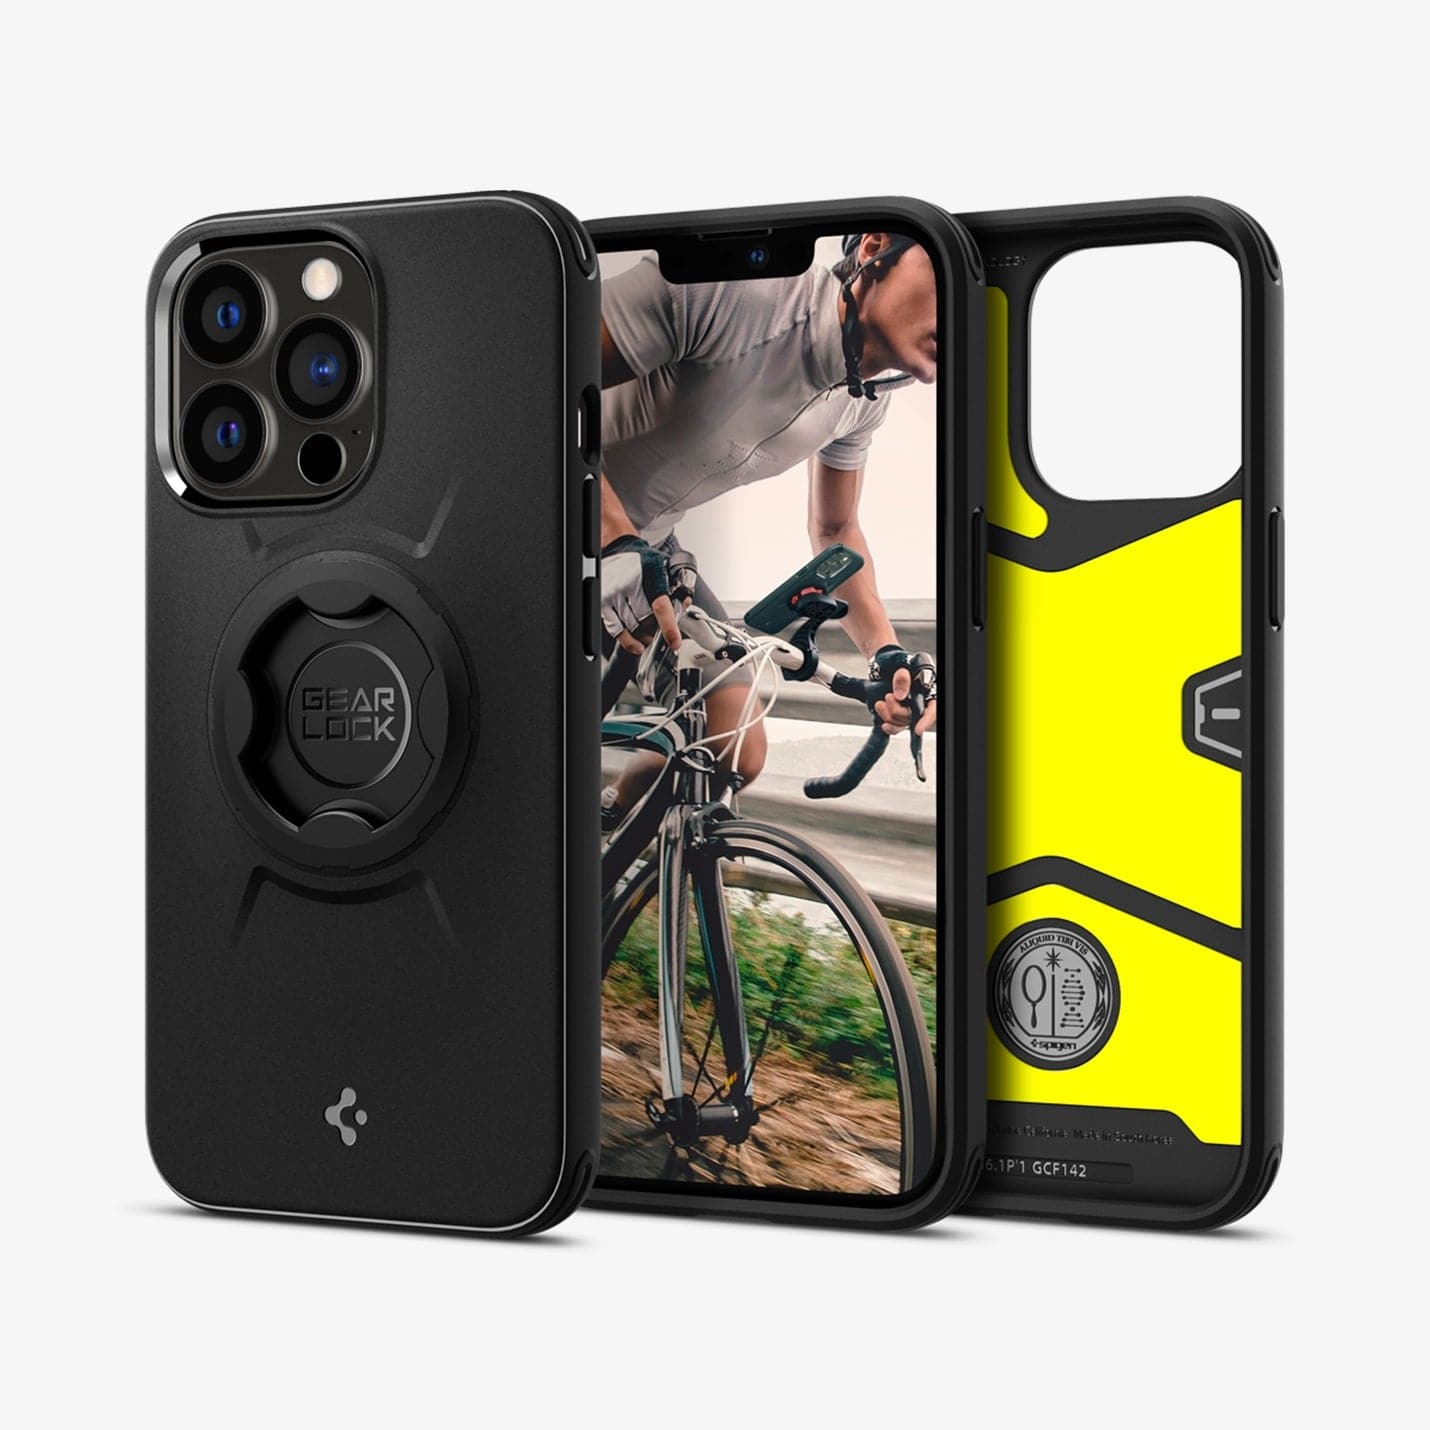 ACS03742 - iPhone 13 Pro Bike Mount Case + Gearlock MF100 showing the back, front and inside of case